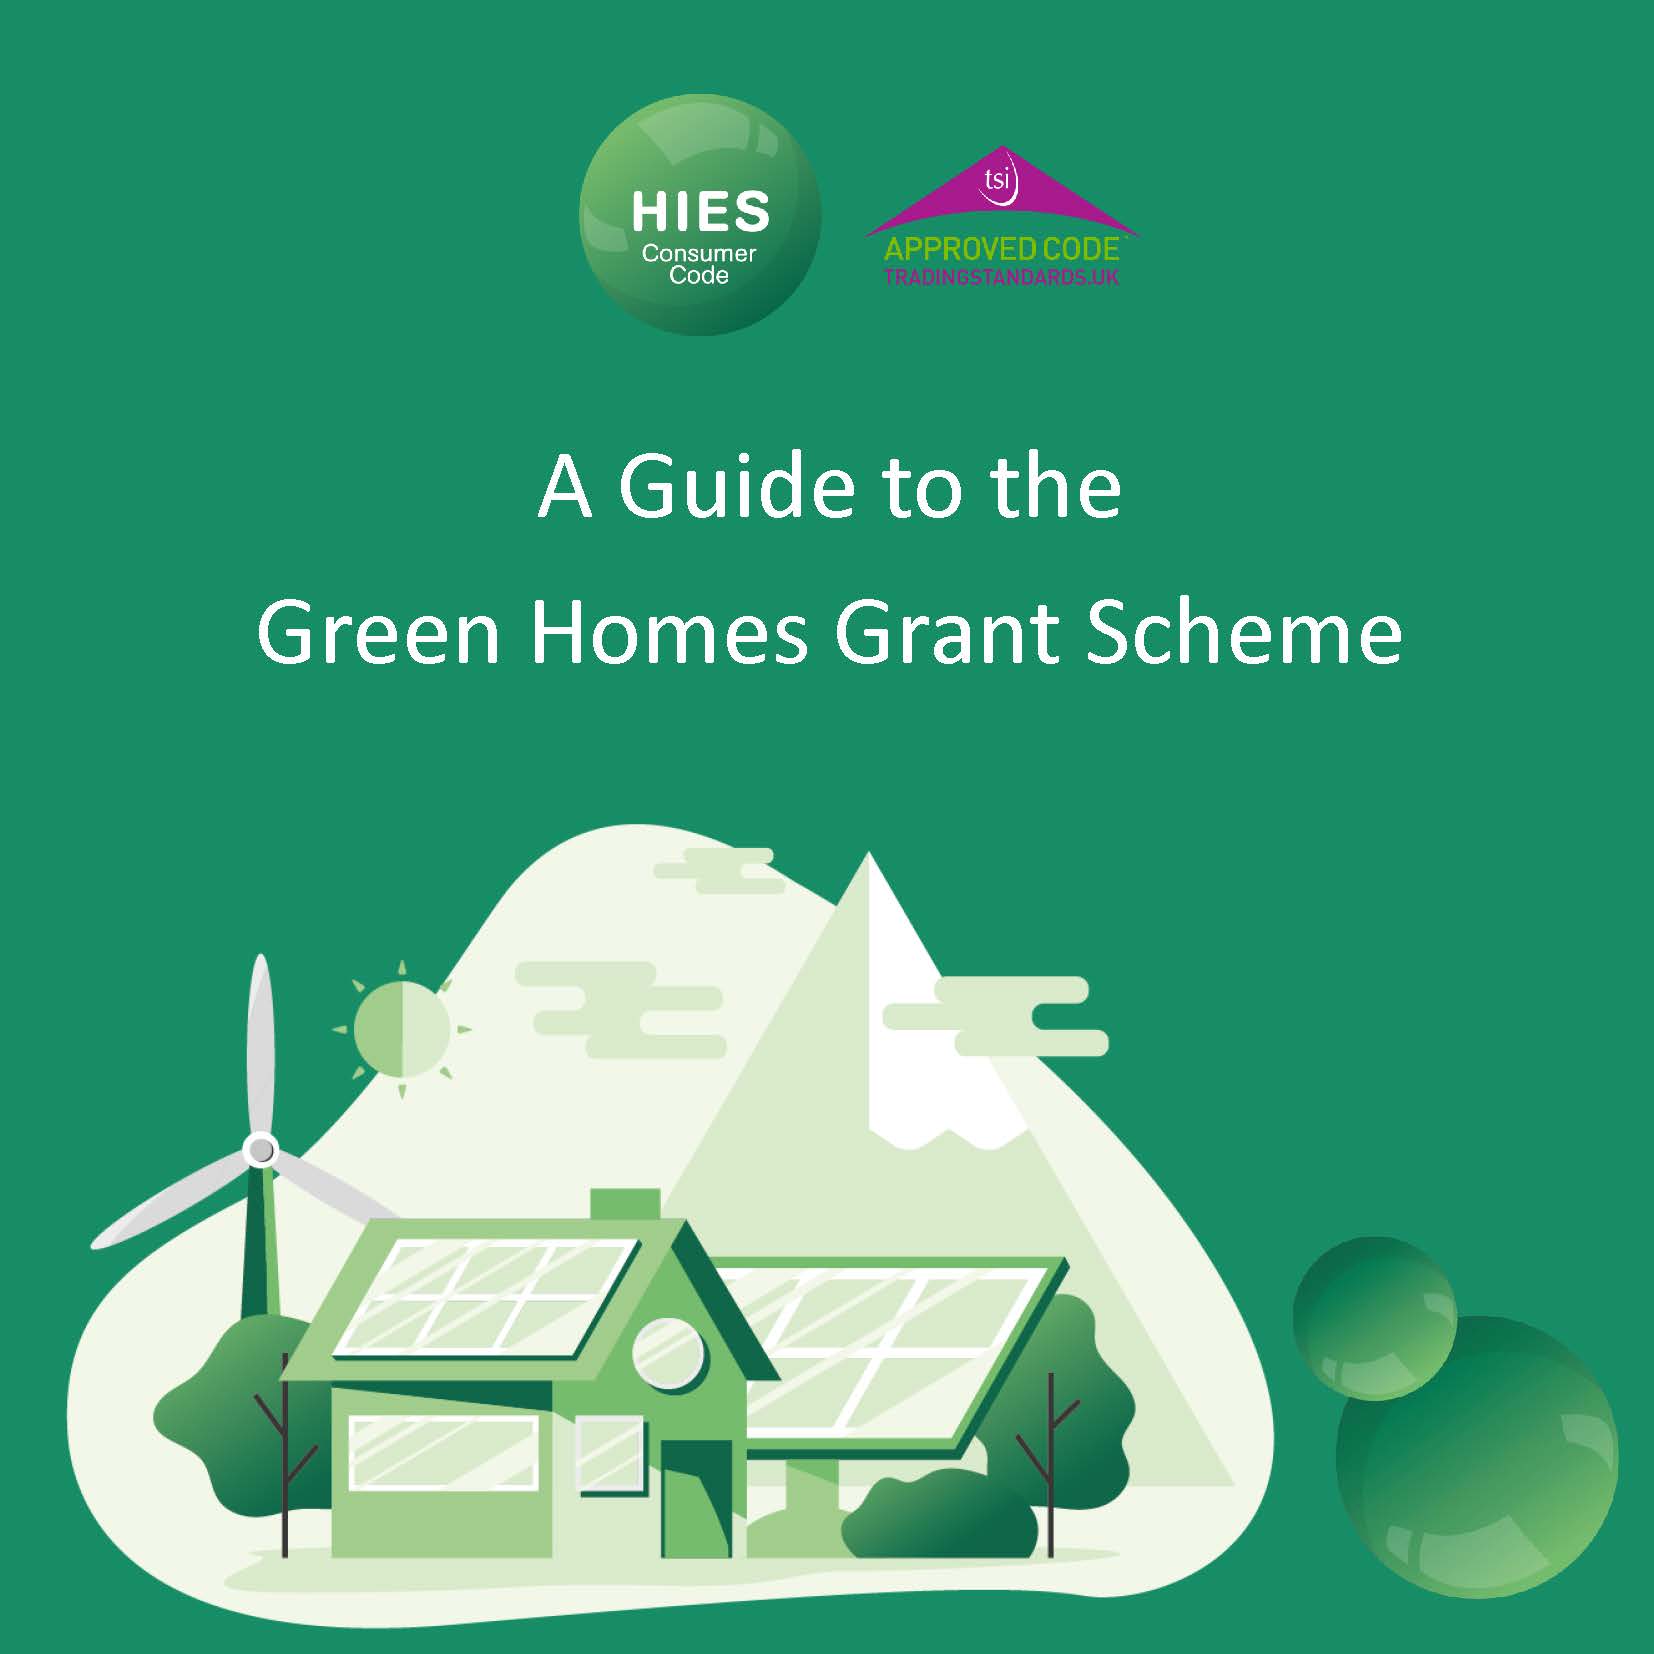 A Guide to the Green Homes Grant Scheme